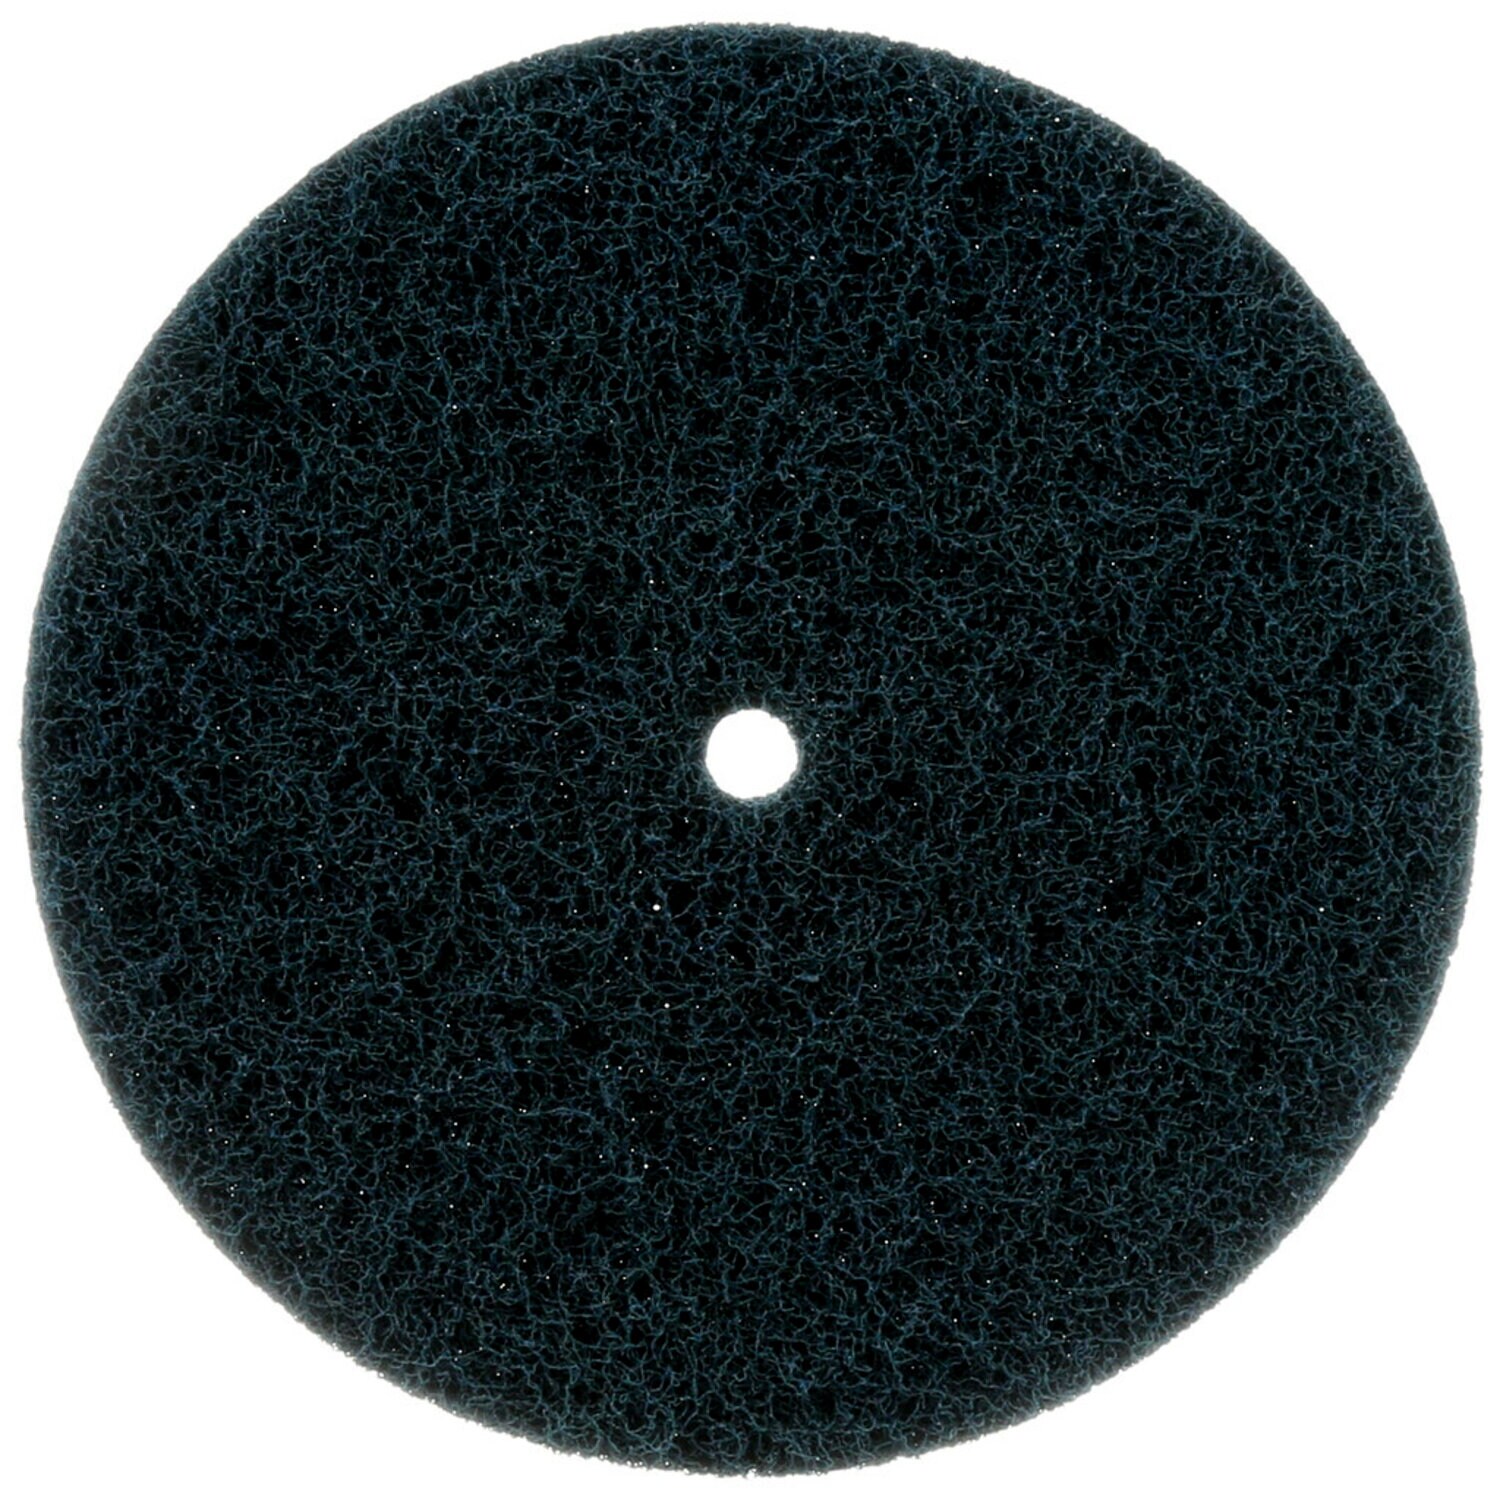 7010330829 - Standard Abrasives Buff and Blend HS Disc, 818910, 8 in x 1 in A MED,
10/Pac, 100 ea/Case